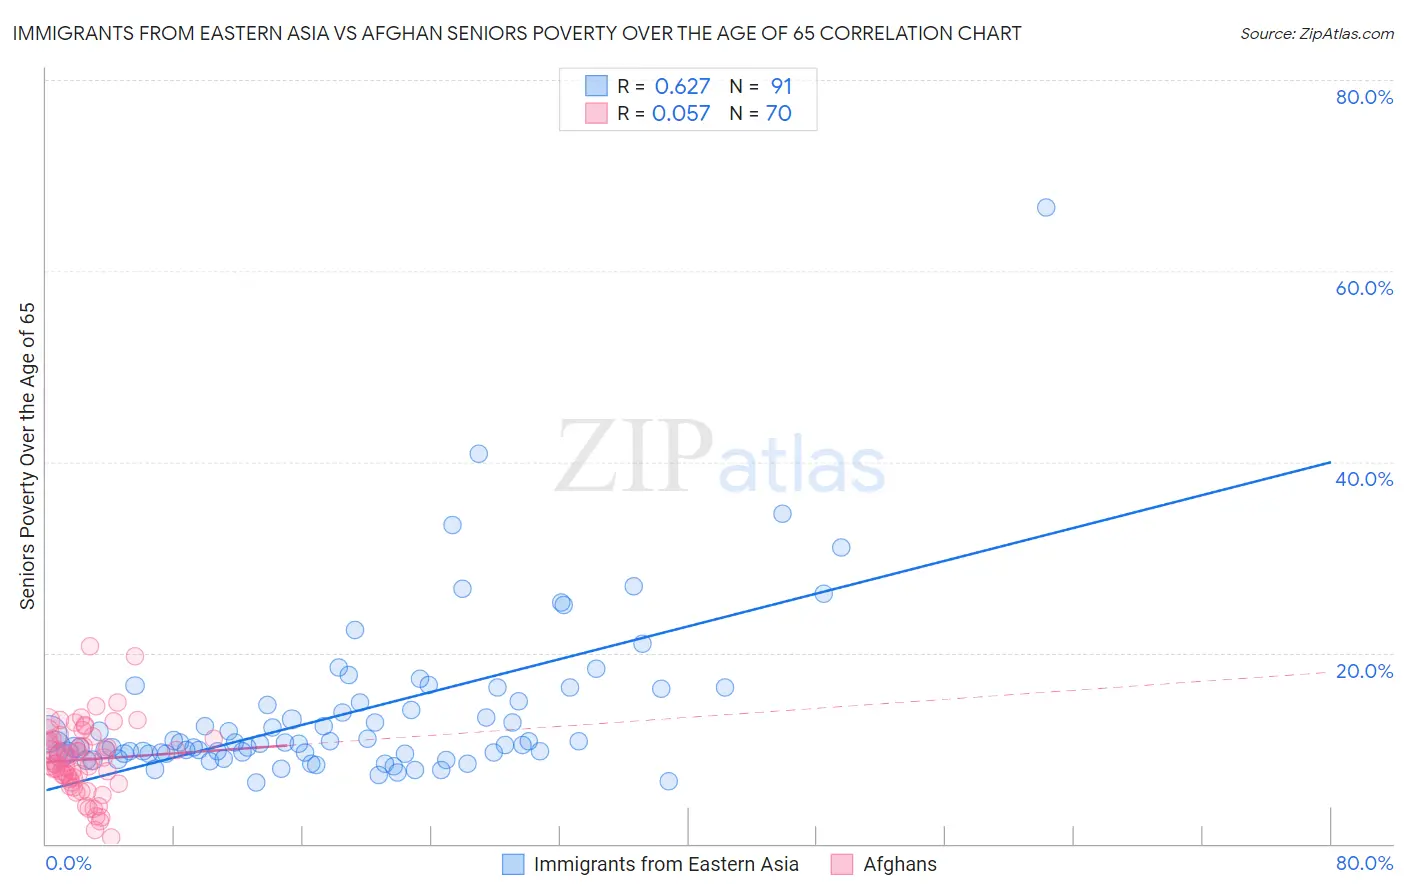 Immigrants from Eastern Asia vs Afghan Seniors Poverty Over the Age of 65